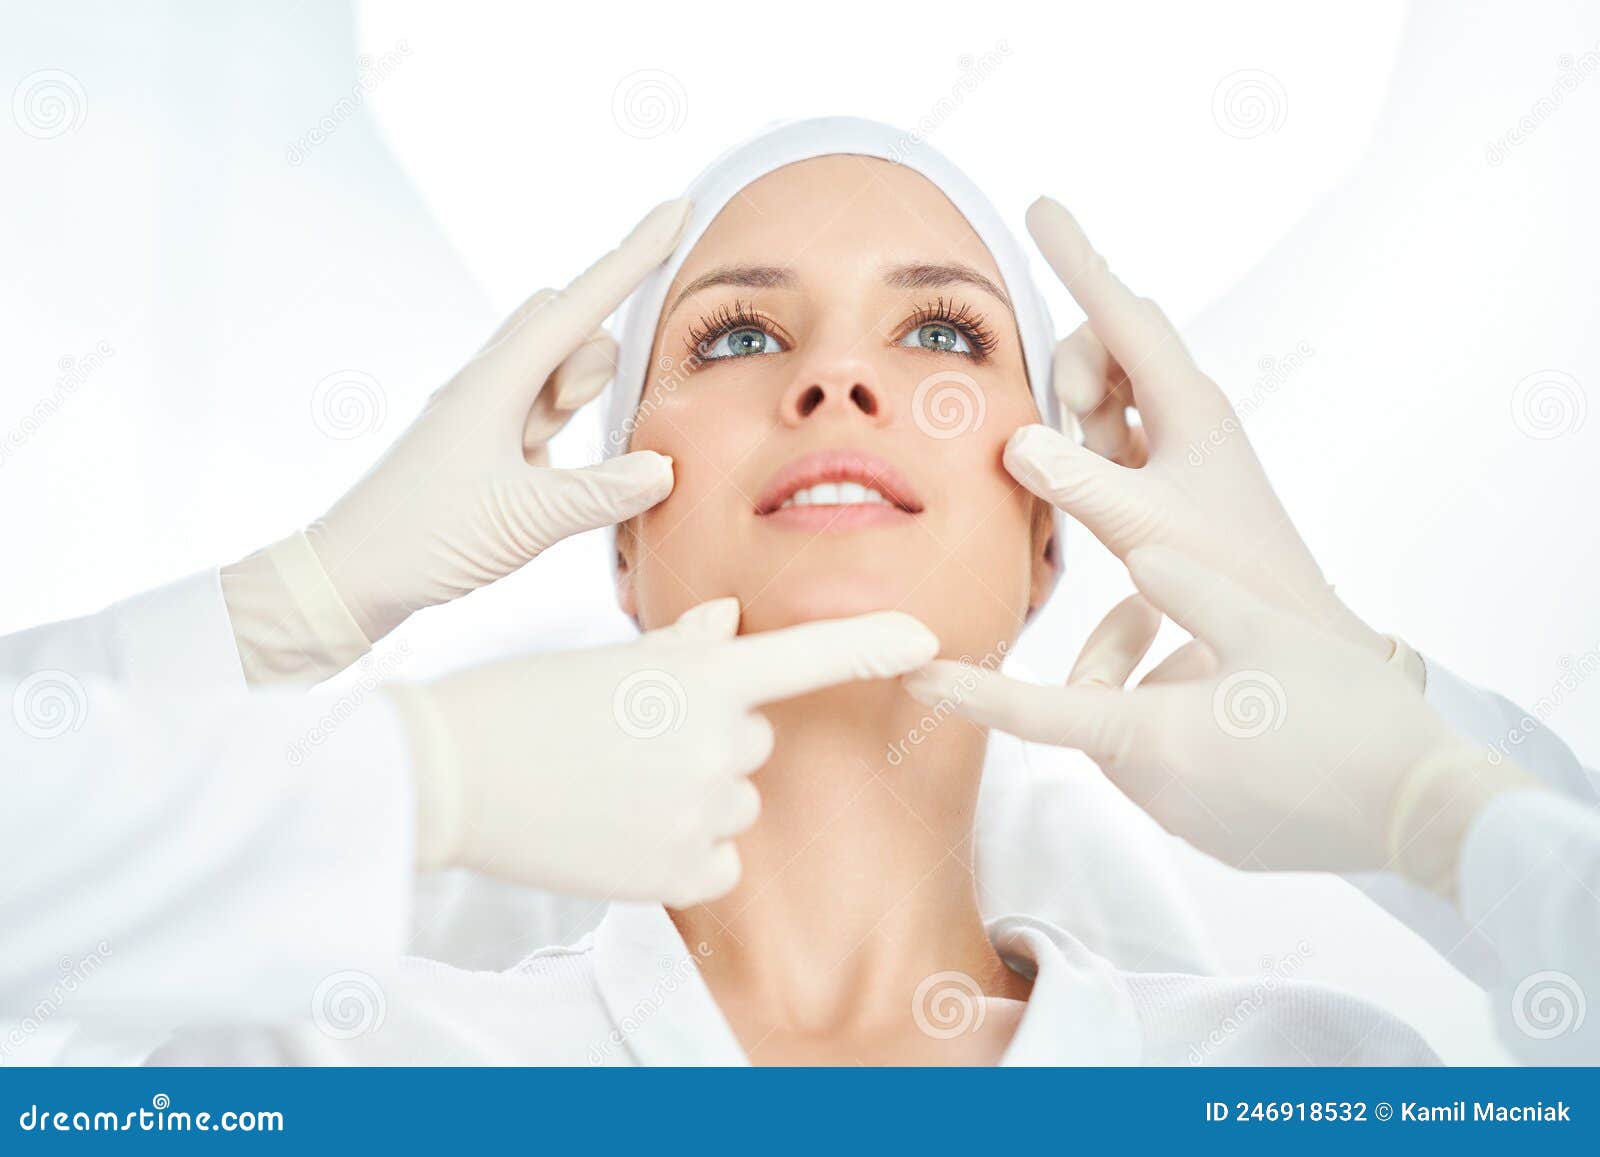 a scene of medical cosmetology treatments botox injection.